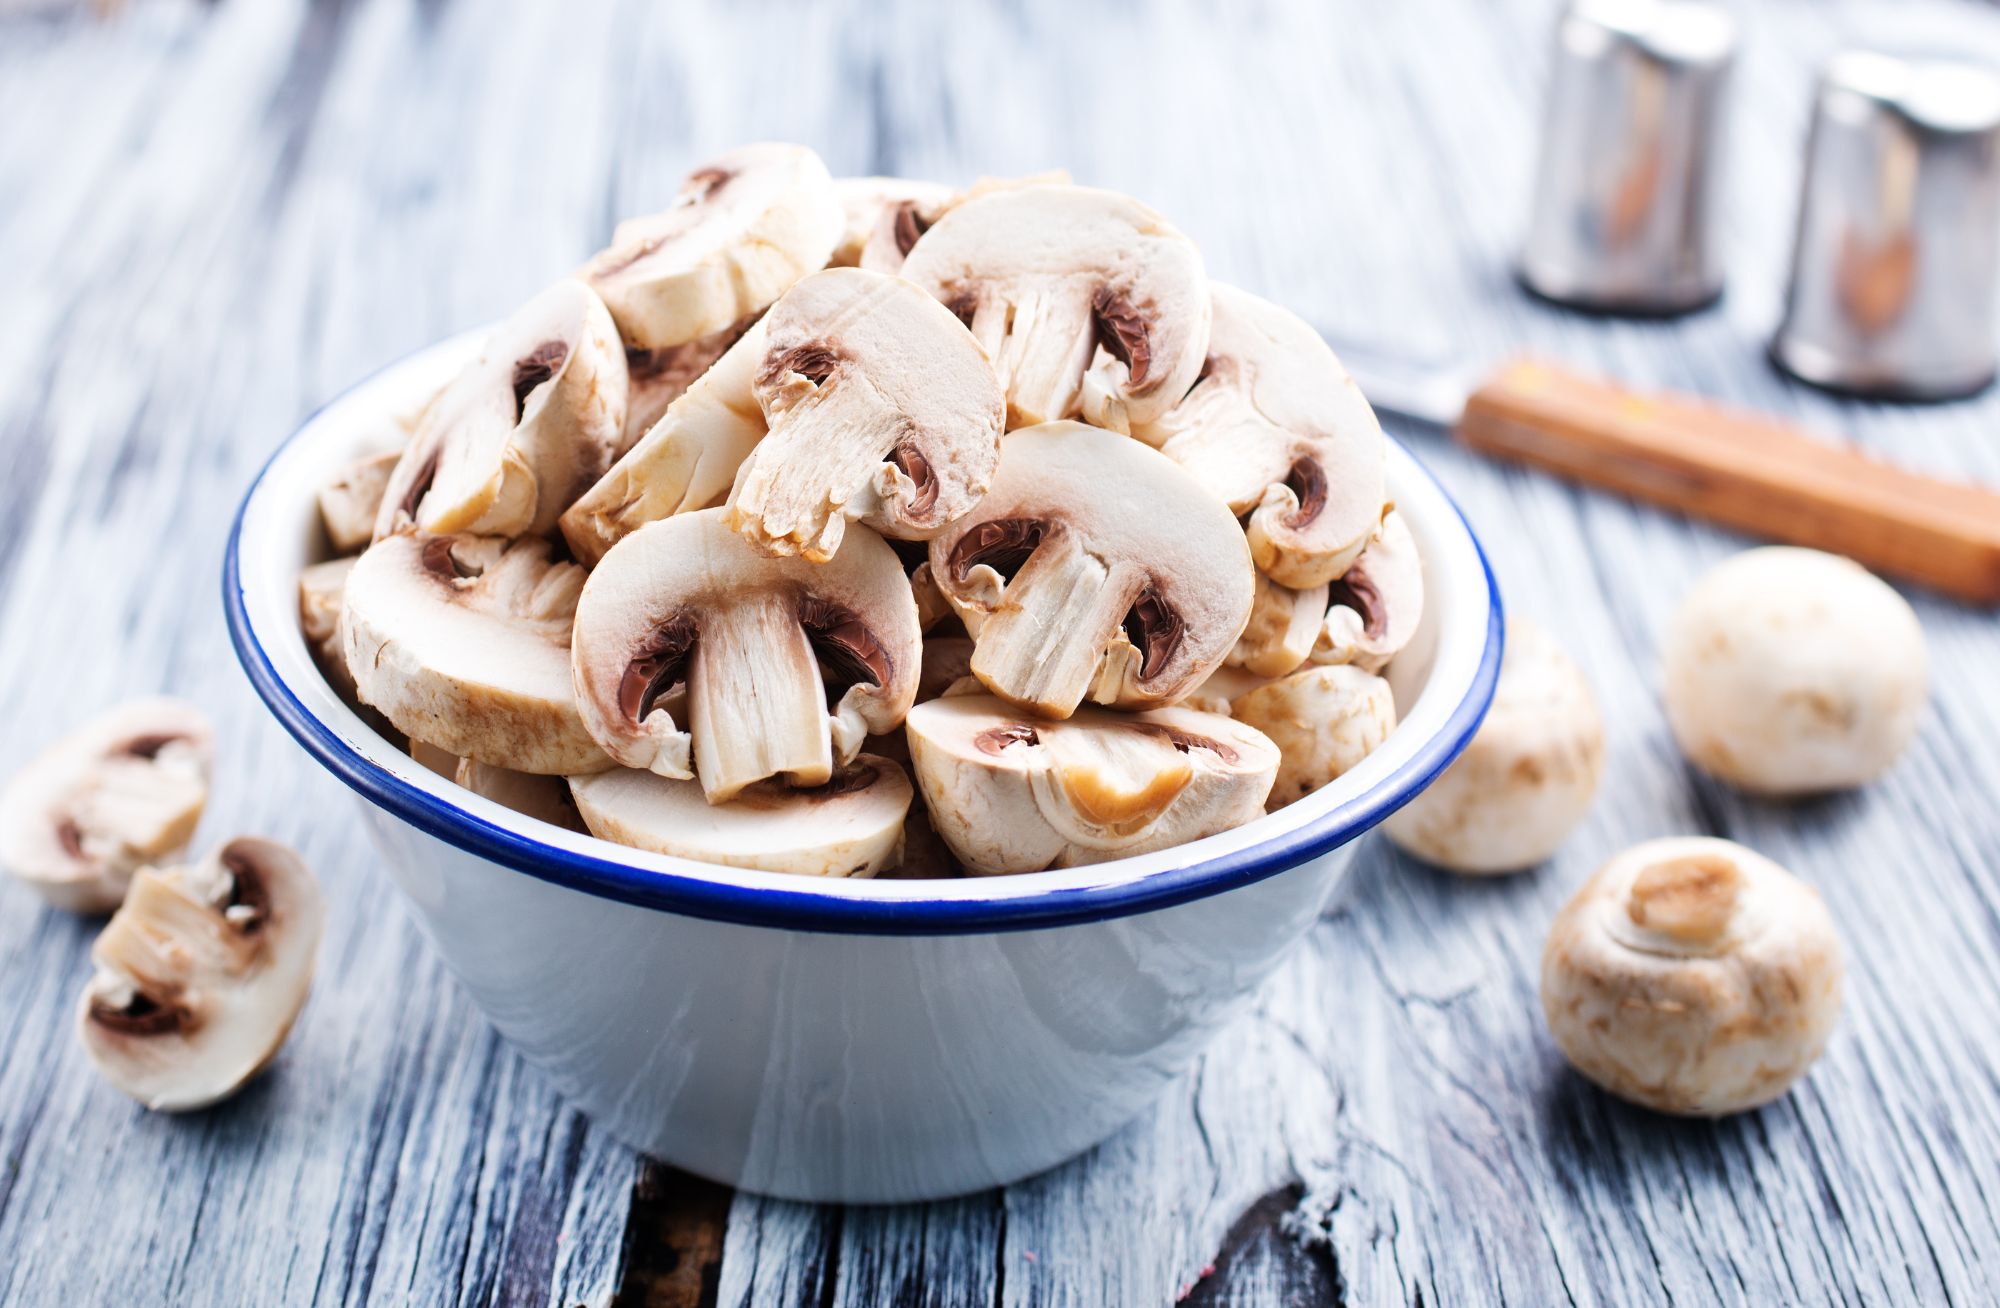 Why is Mushroom Amazing for Your Skin? Benefits of Mushroom for Skincare